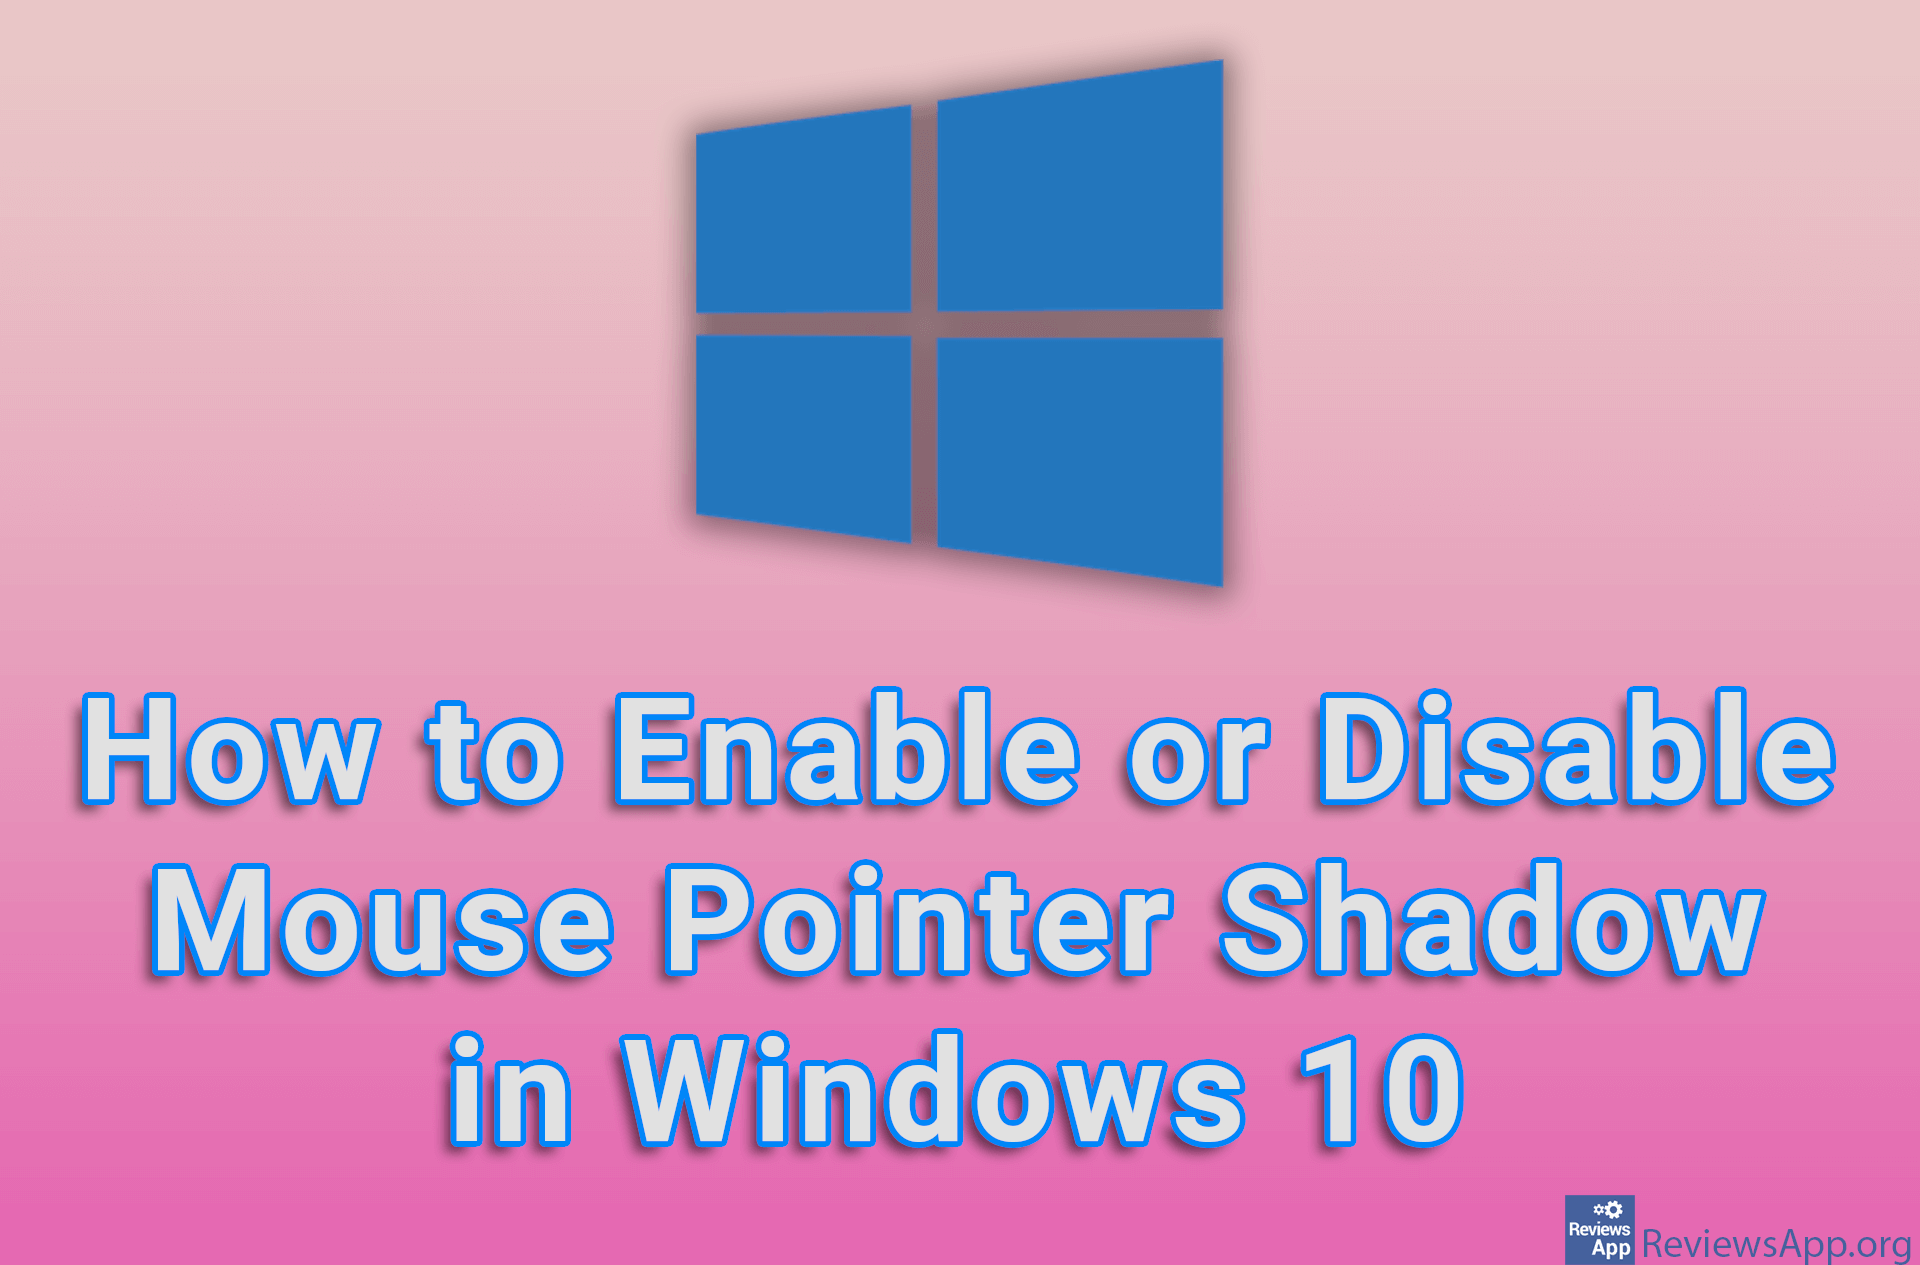 How to Enable or Disable Mouse Pointer Shadow in Windows 10